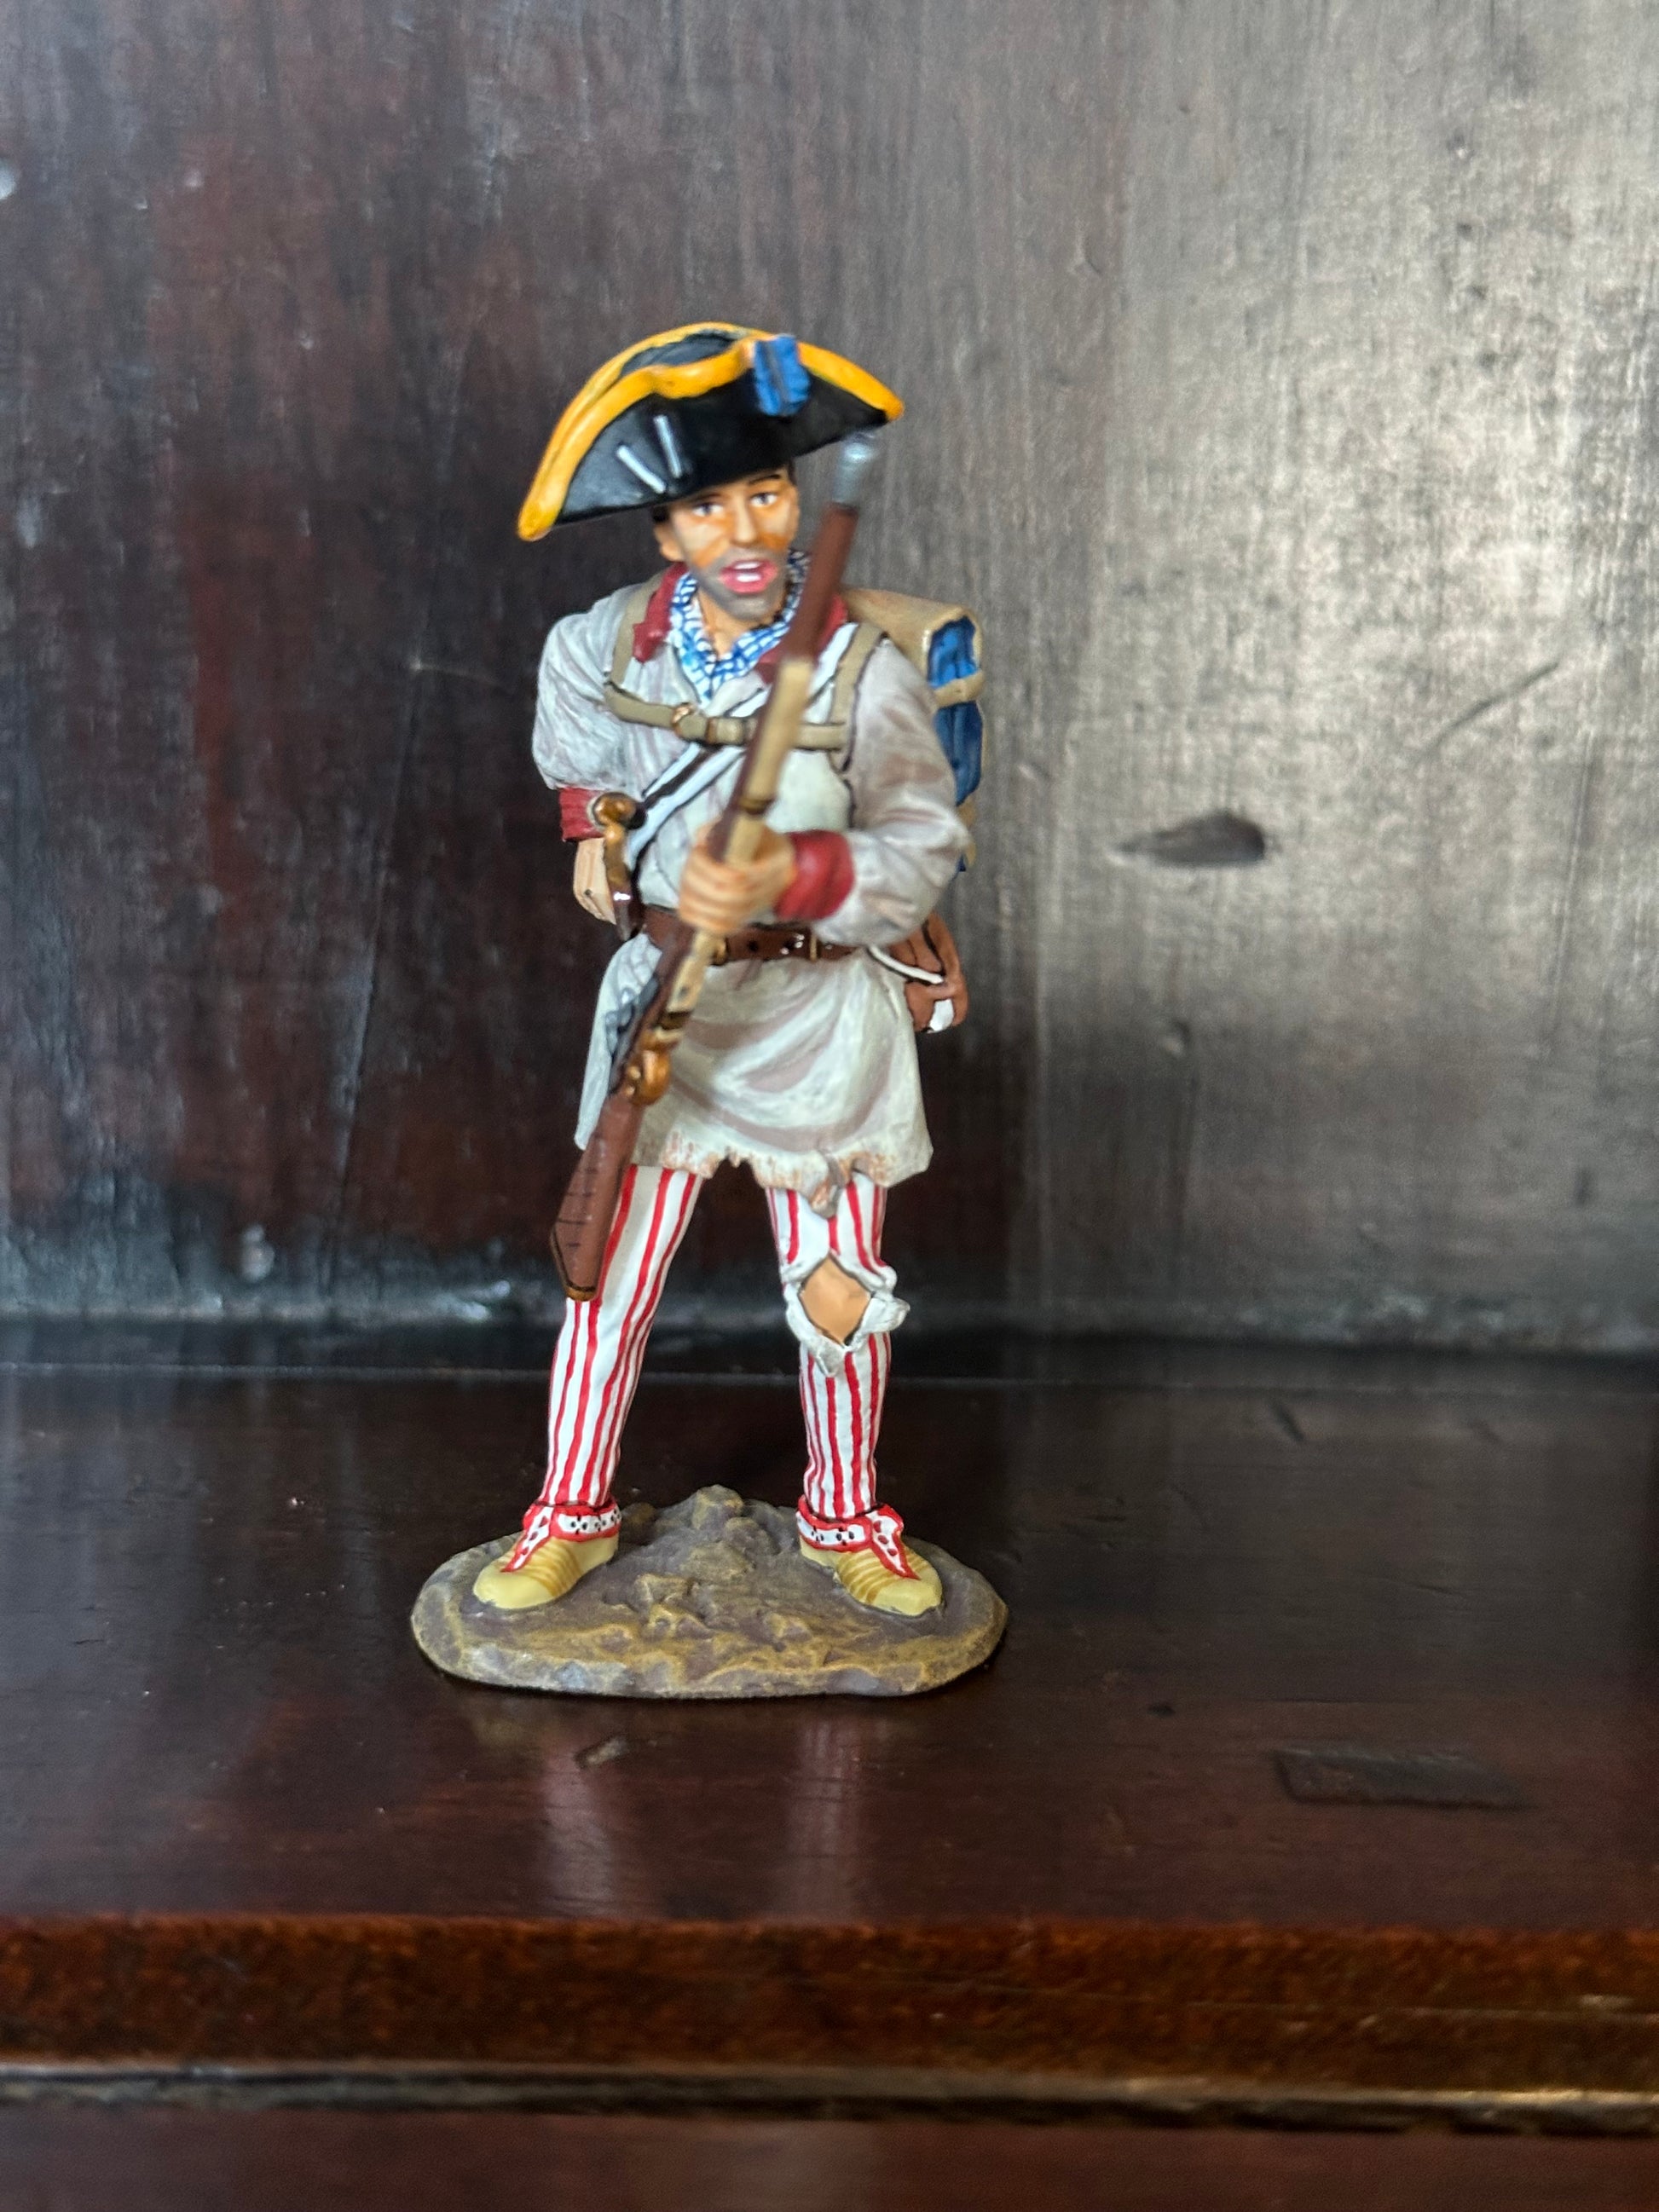 Collectible toy soldier miniature army men Rifleman Holding Cartridge. Displayed on a shelf.